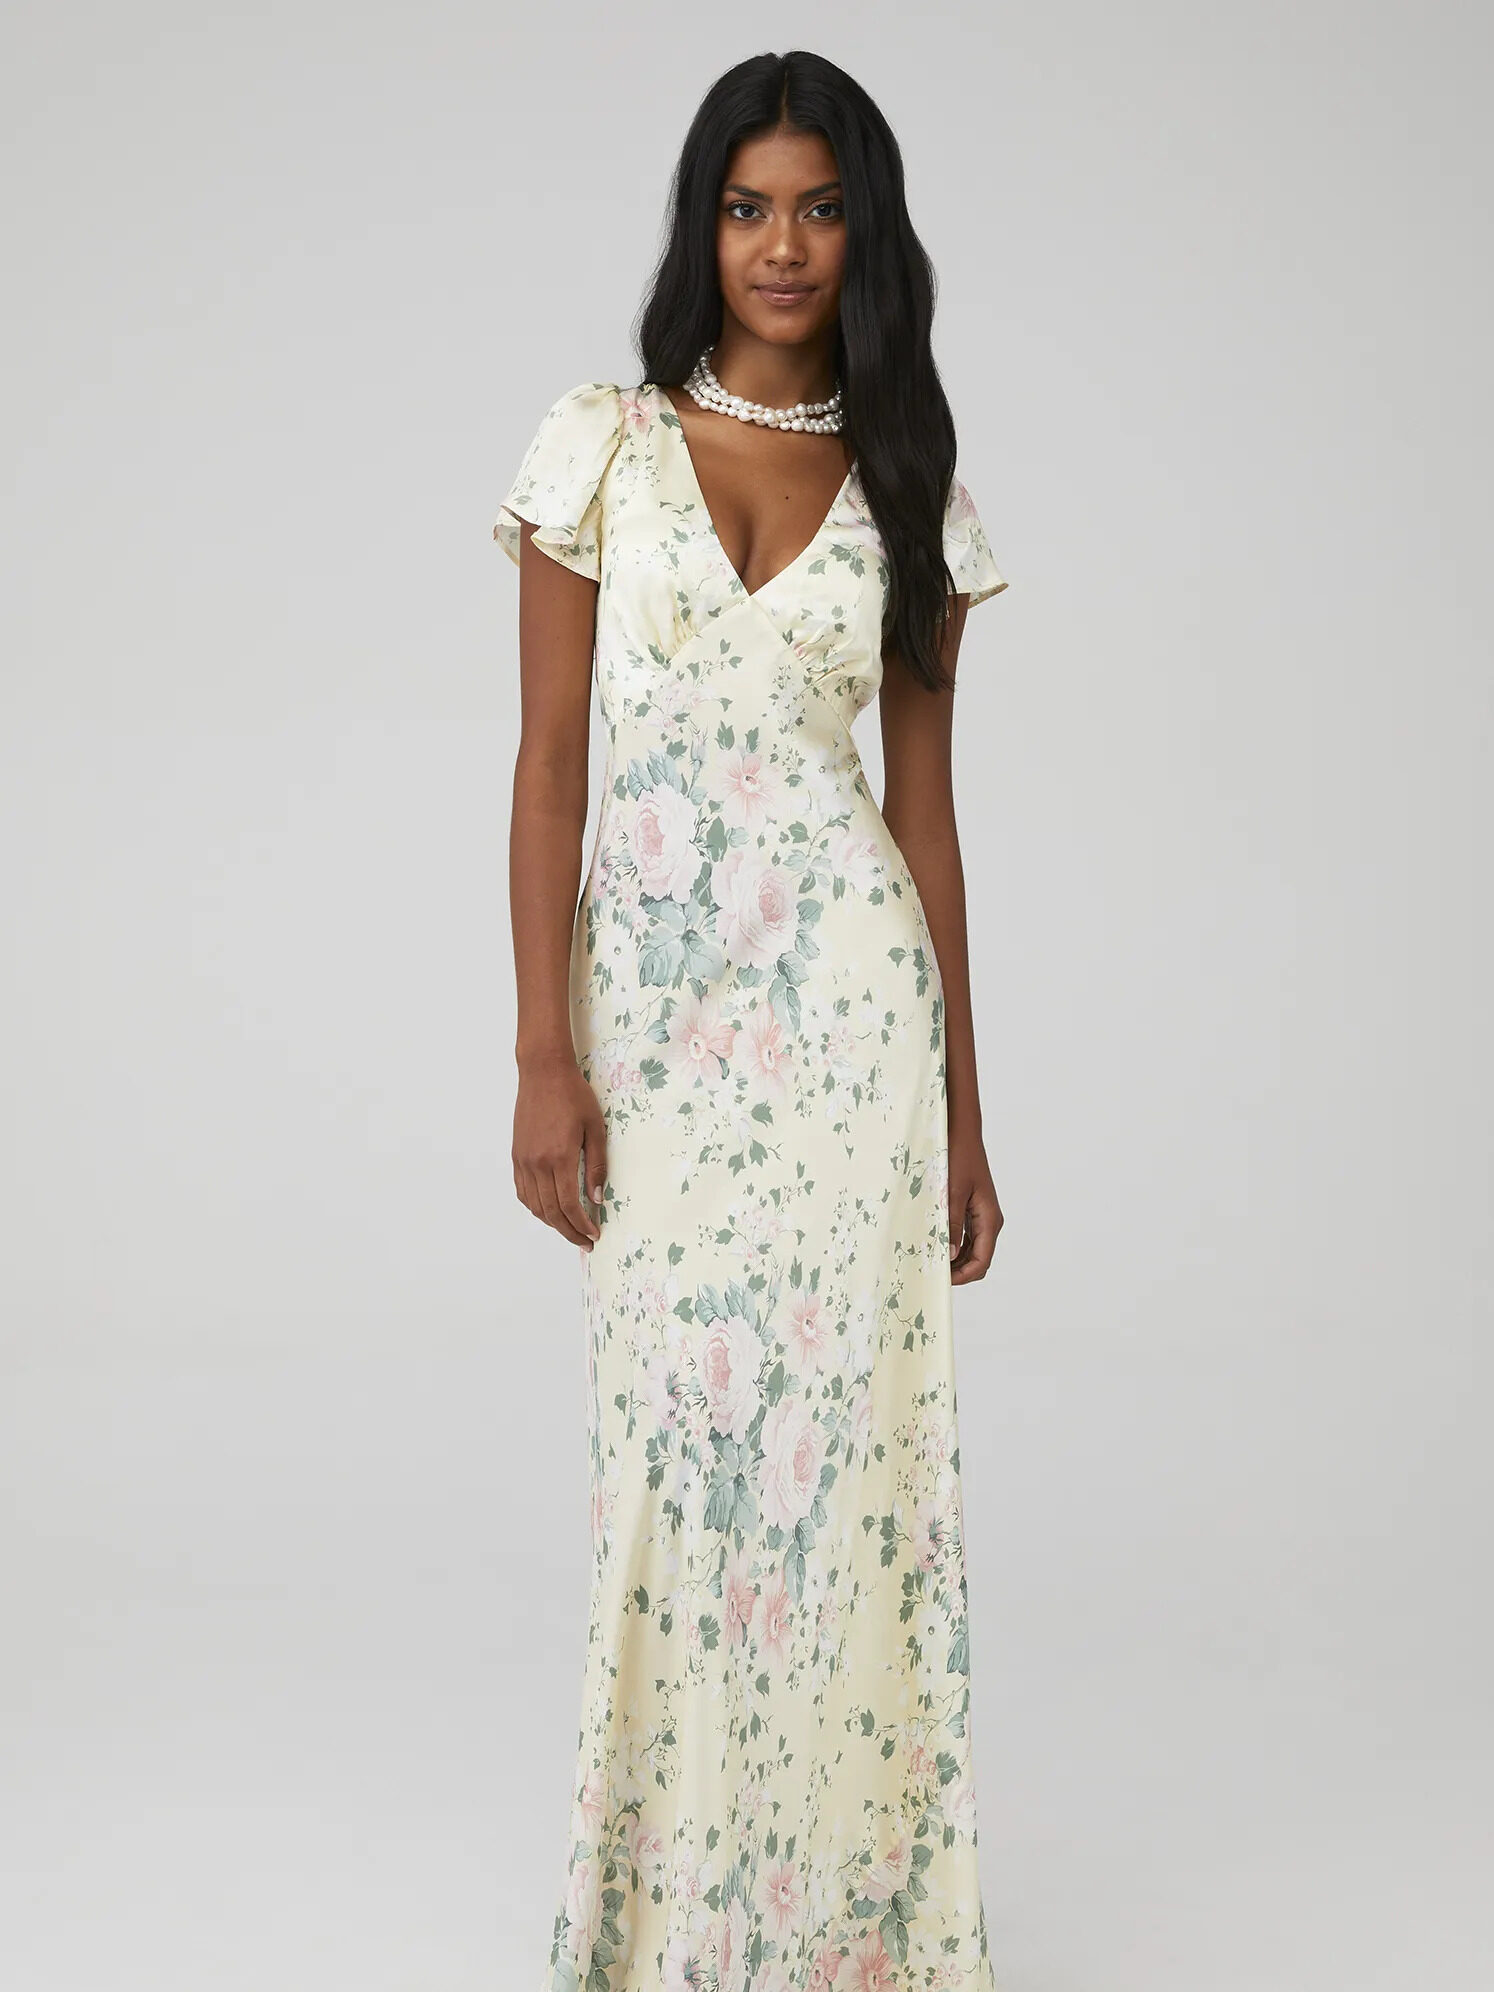 A model wearing a white cap sleeve maxi dress with blue and pink florals from FashionPass.